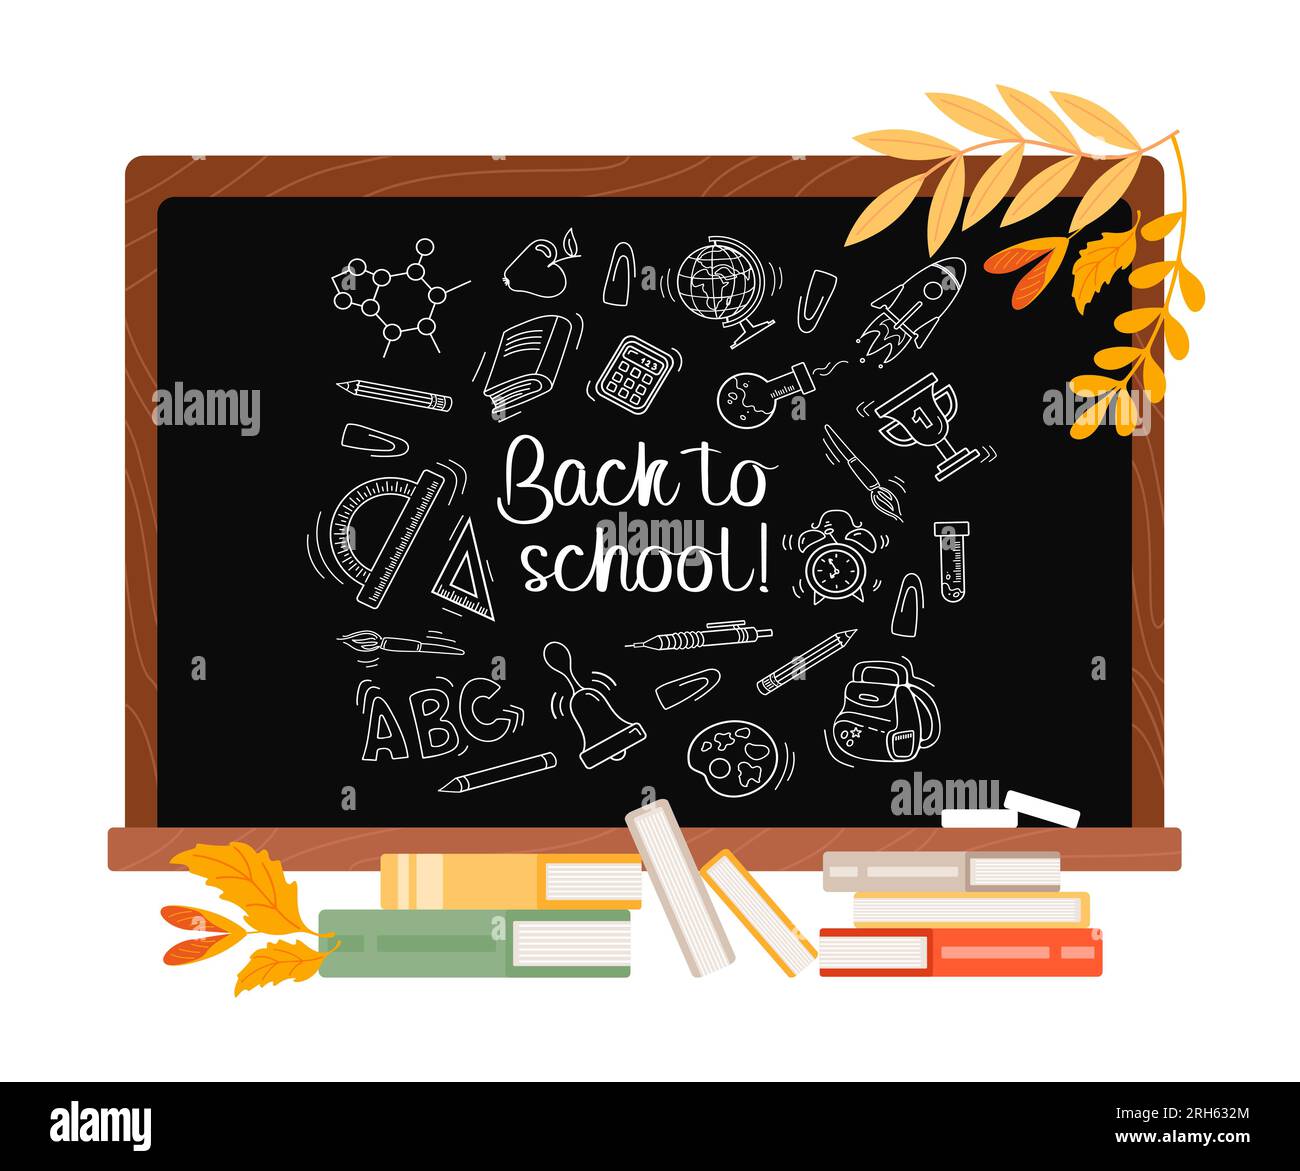 Back to school. School board with chalk drawings, stacks of books and autumn leaves. For wallpaper, printing on fabrics, packaging. For posters, postc Stock Vector